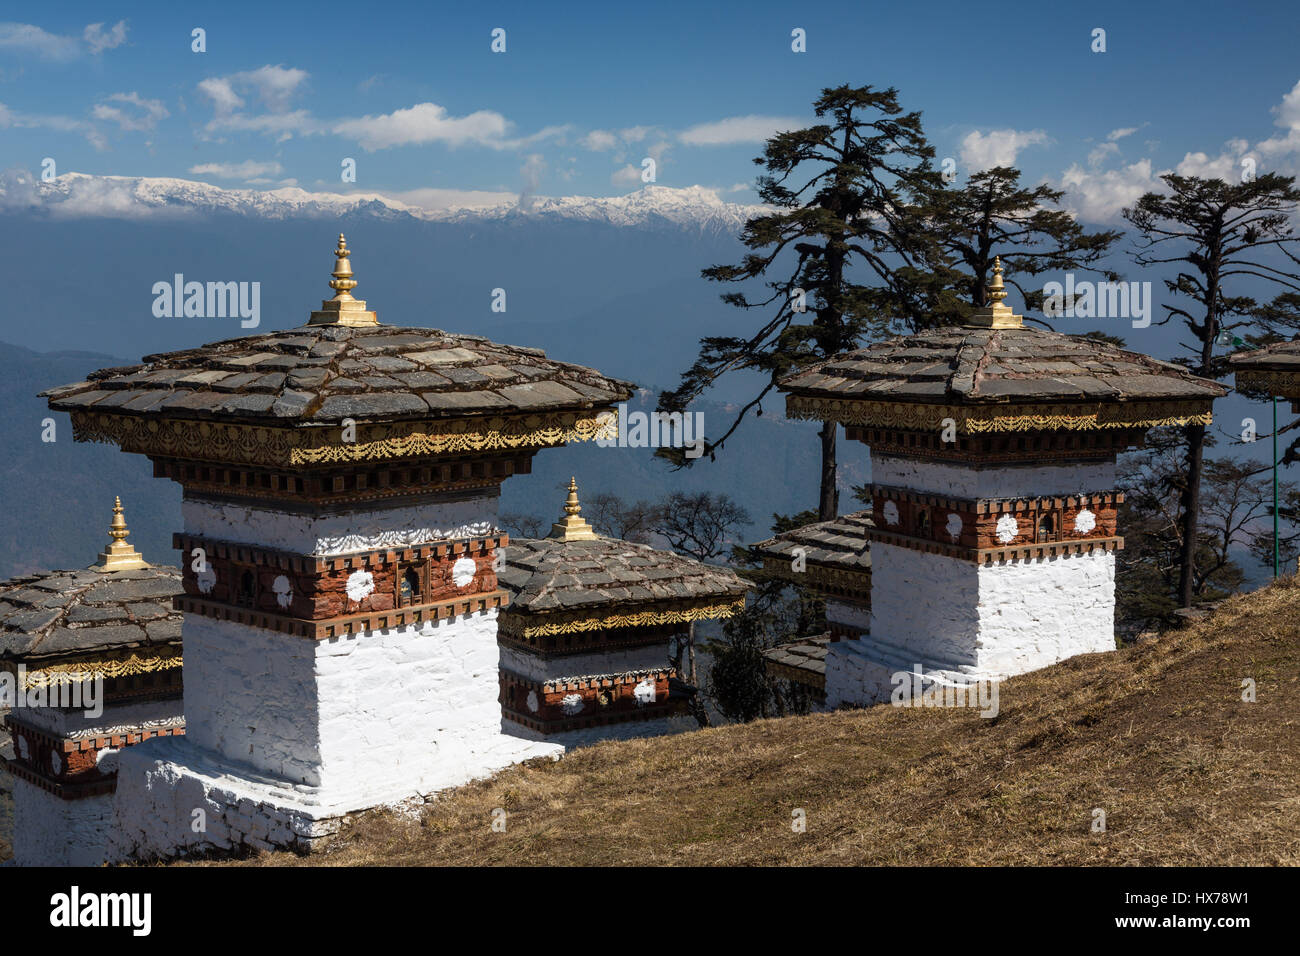 The 108 Druk Wangyal Khang Zhang Chortens, or stupas, are a sacred Bhuddist memorial.  They are red-band or khangzang chortens and are located on a hi Stock Photo